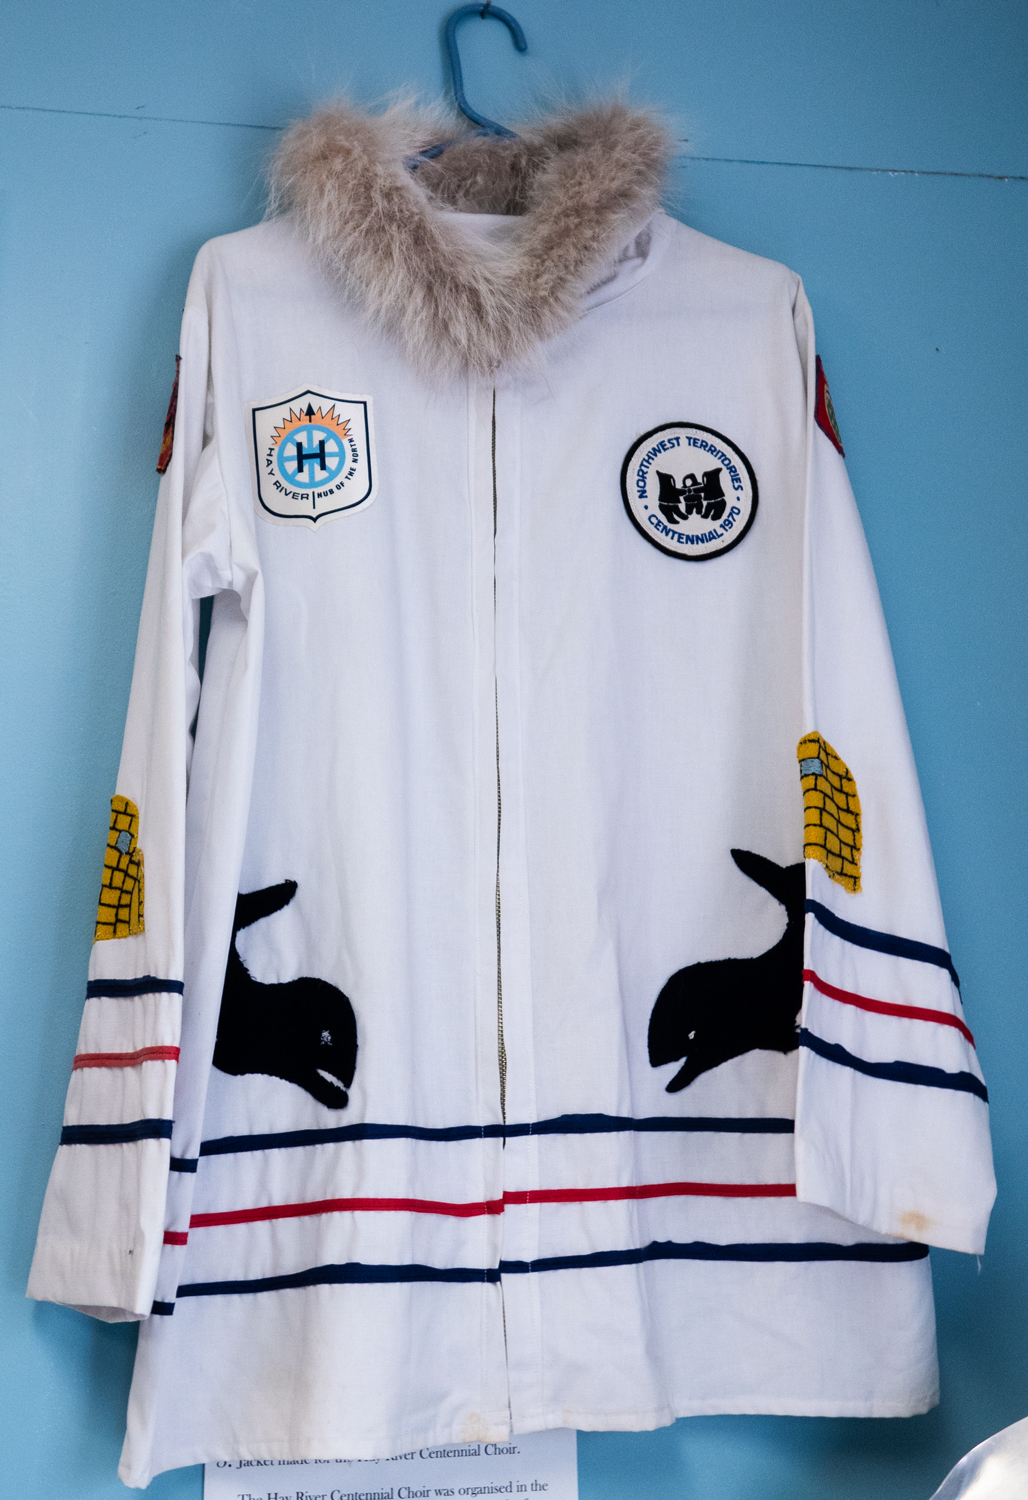 A white parka like jacket hangs on a wall. The jacket has a fur collar, three stripes across the bottom and lower sleeves, two whales swimming toward each other, and symbolic patches.